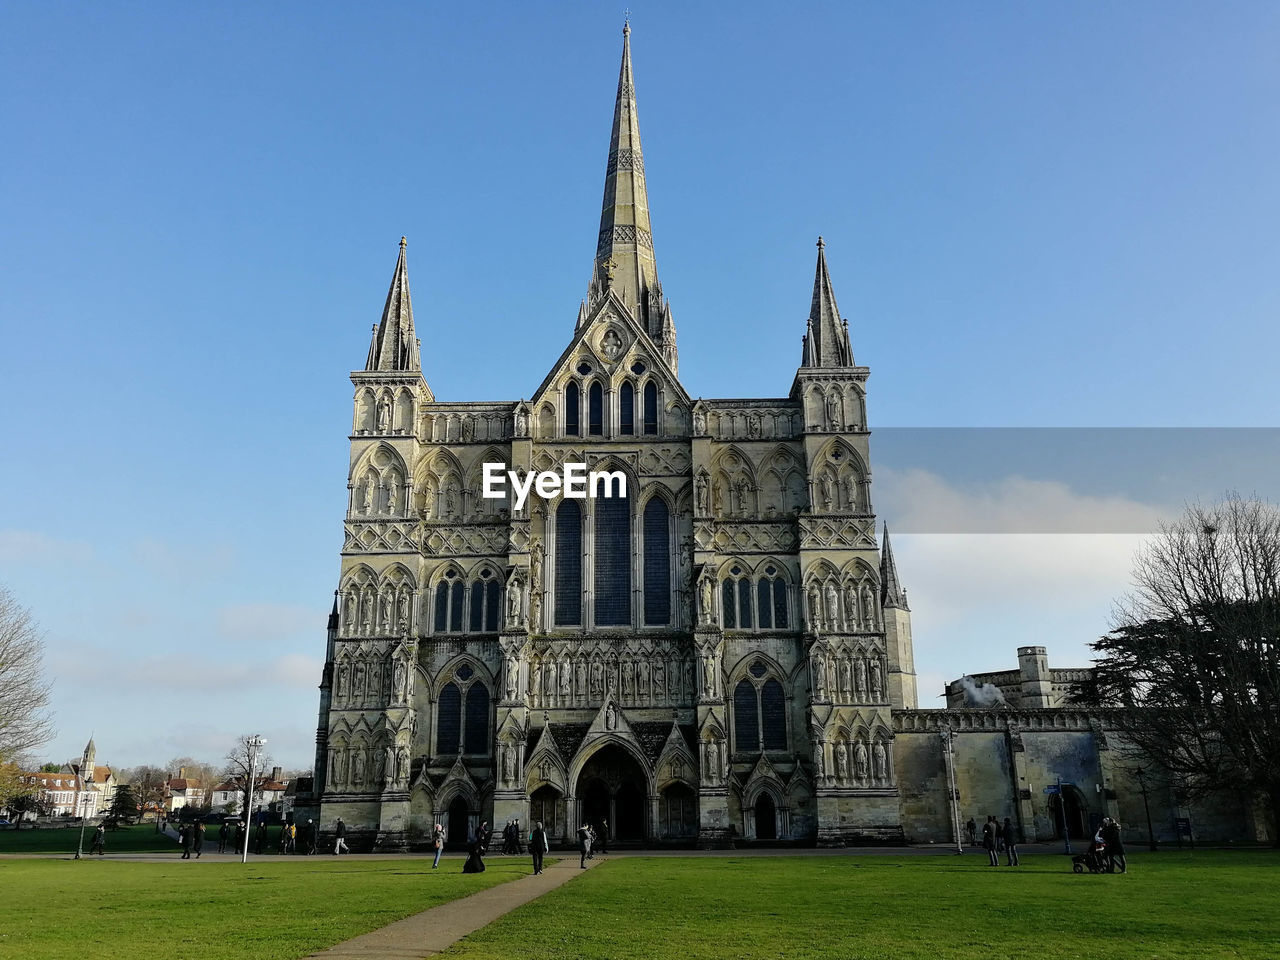 Salisbury cathedral in december 